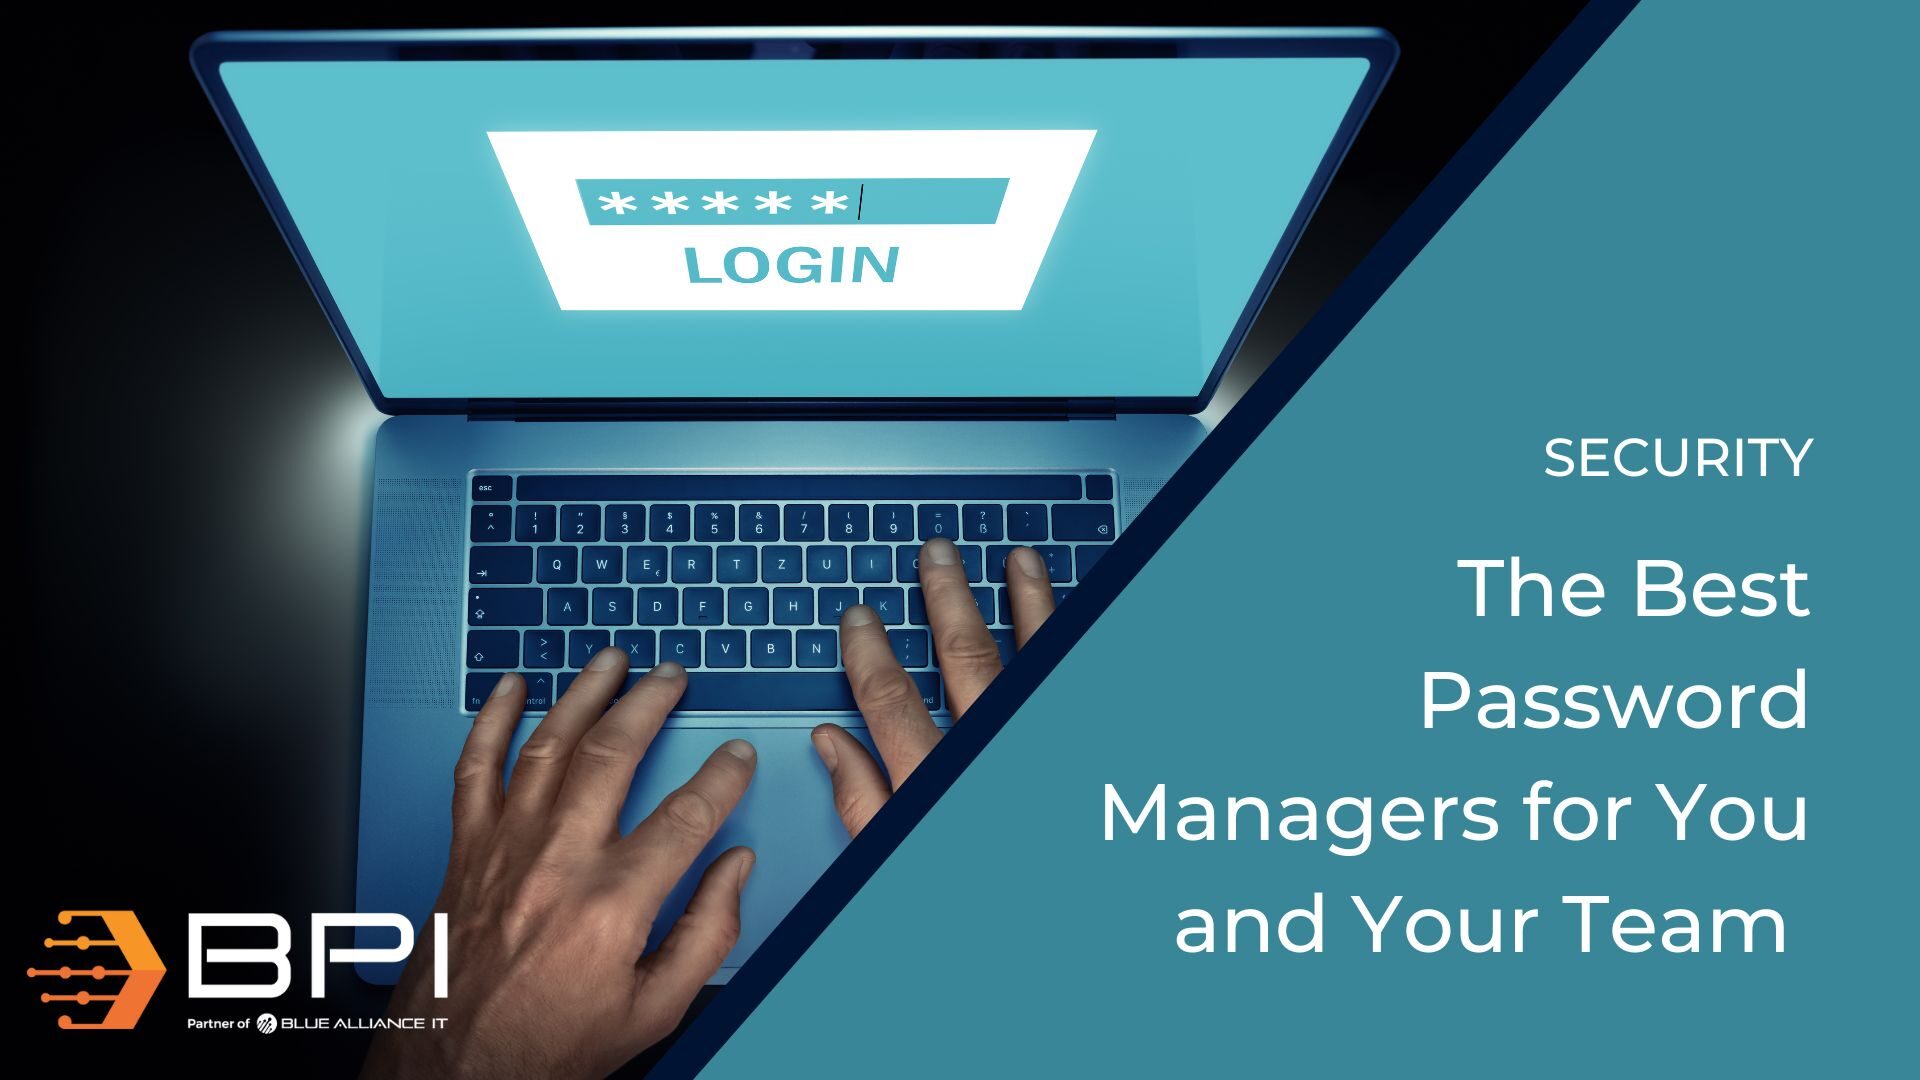 The best password managers for your team